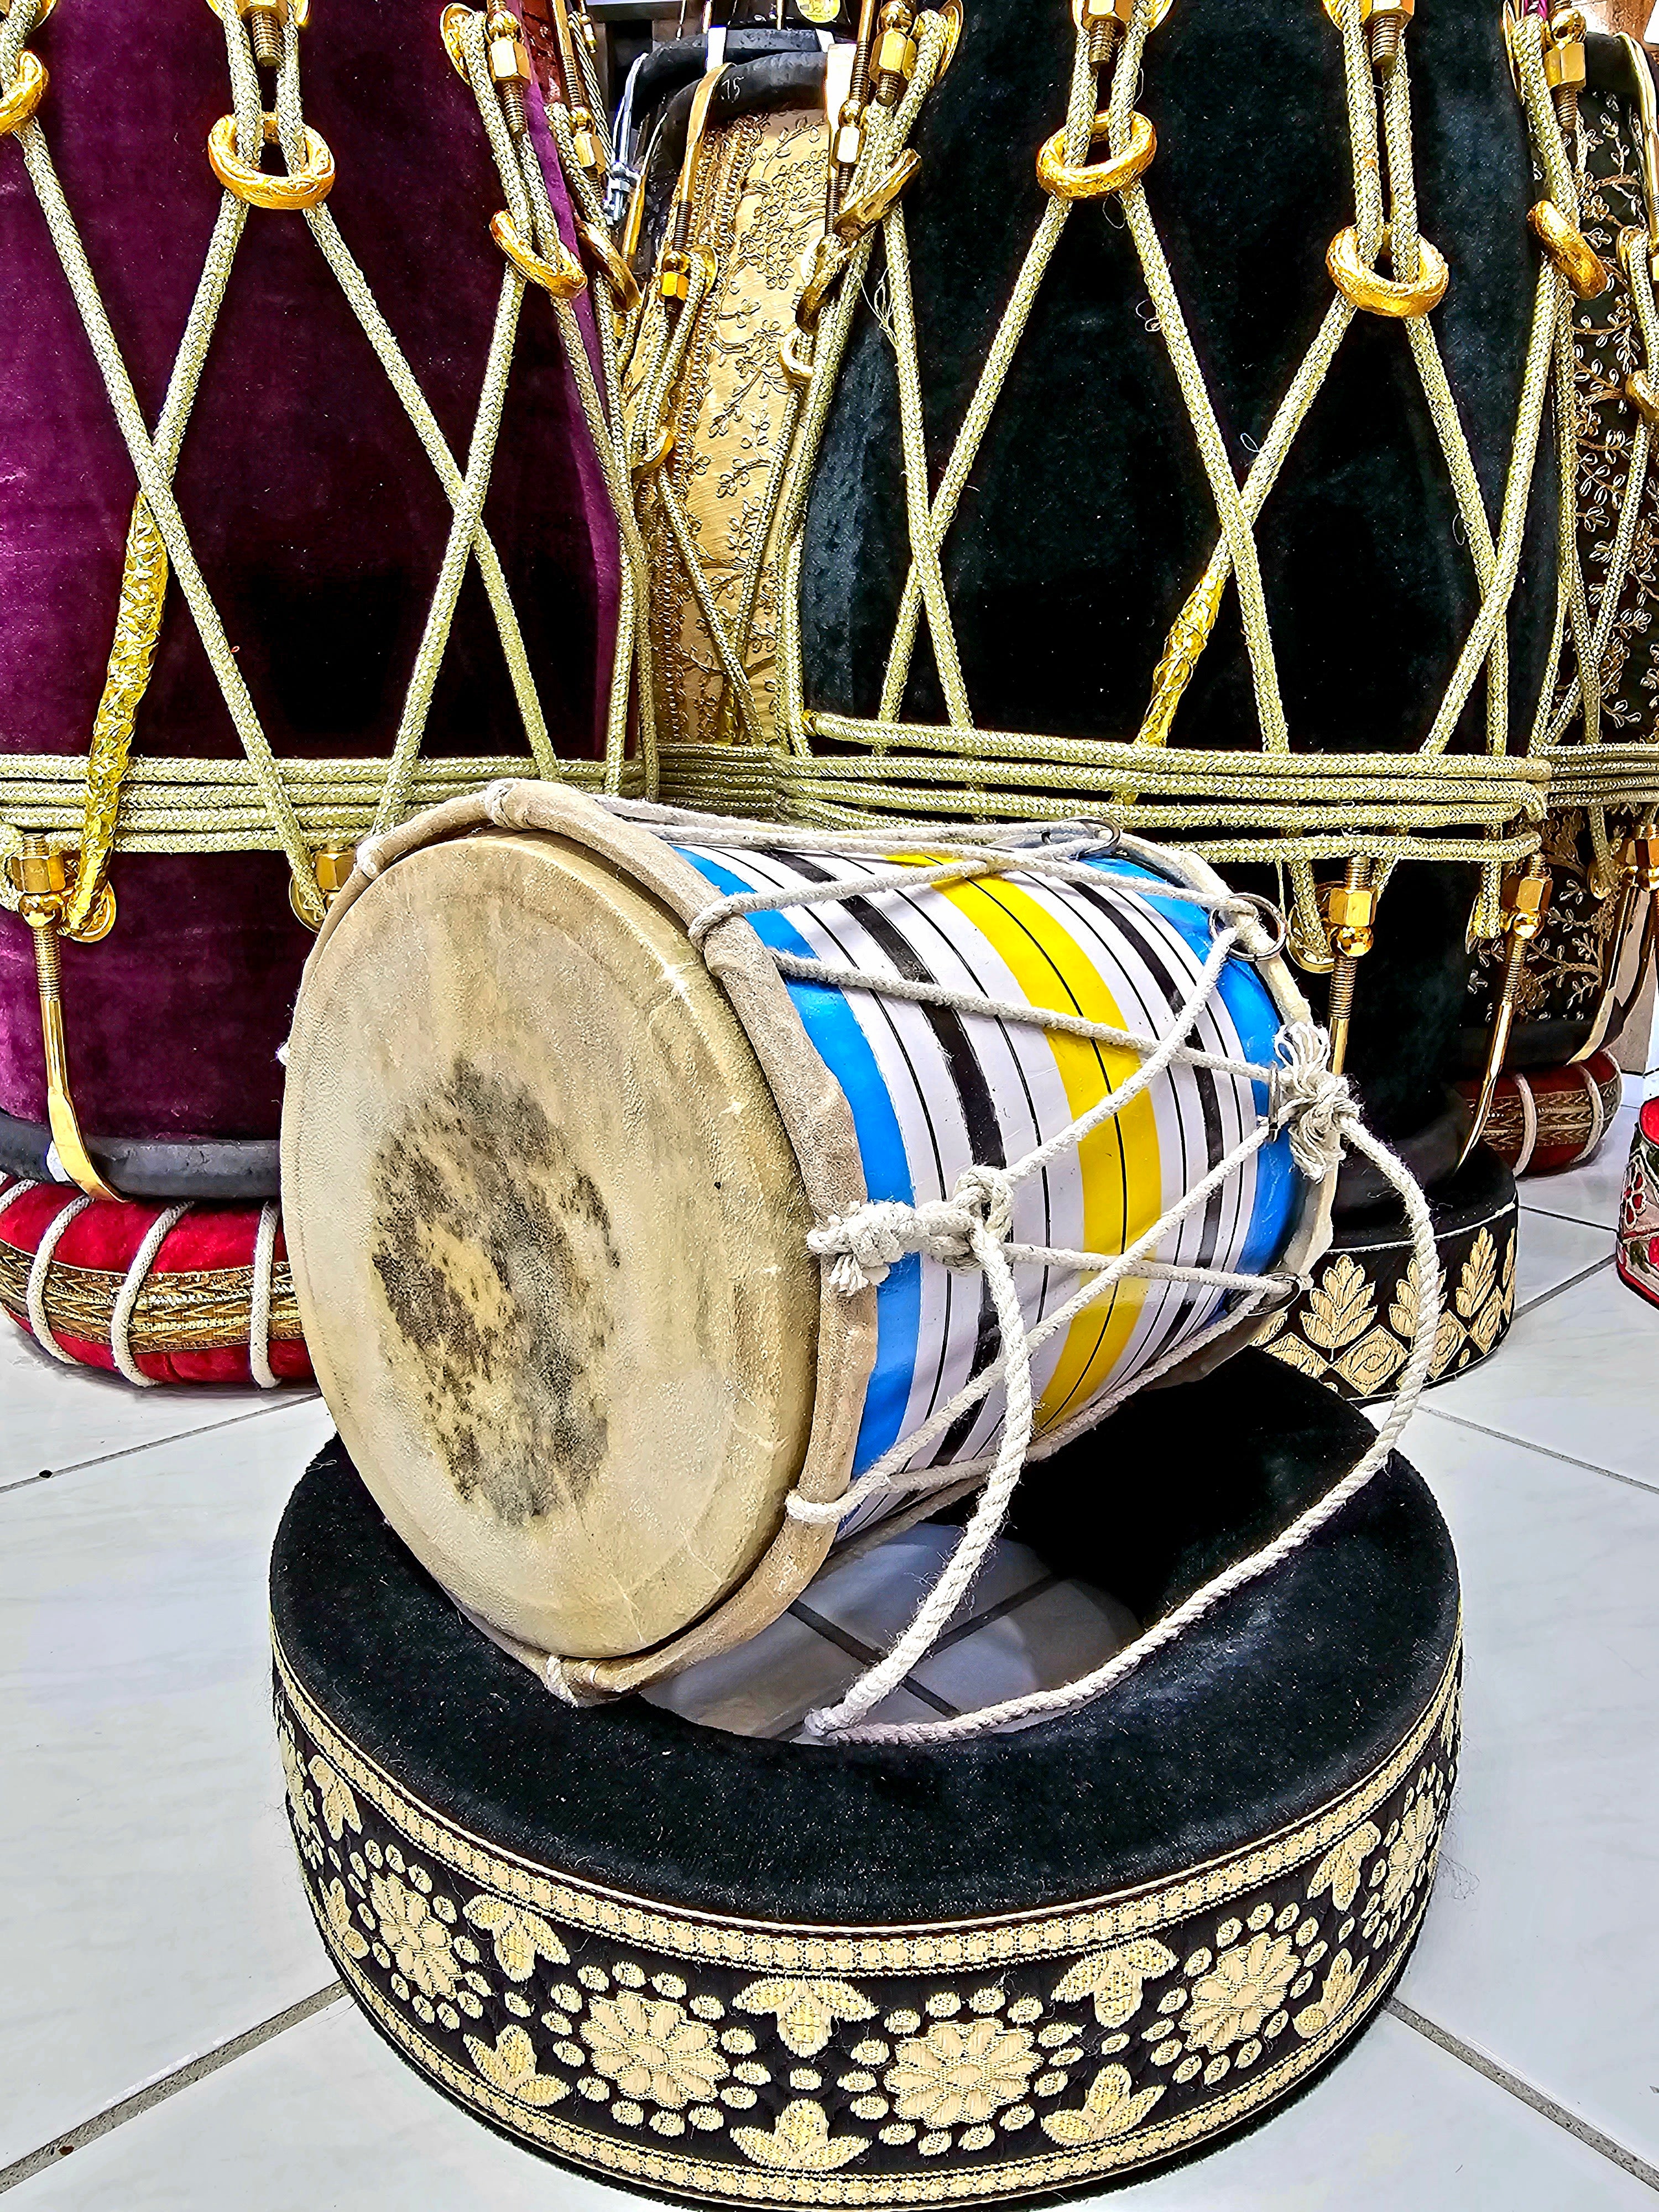 Blue Painted Playable Toddler Dholak (1-3 Year Olds)